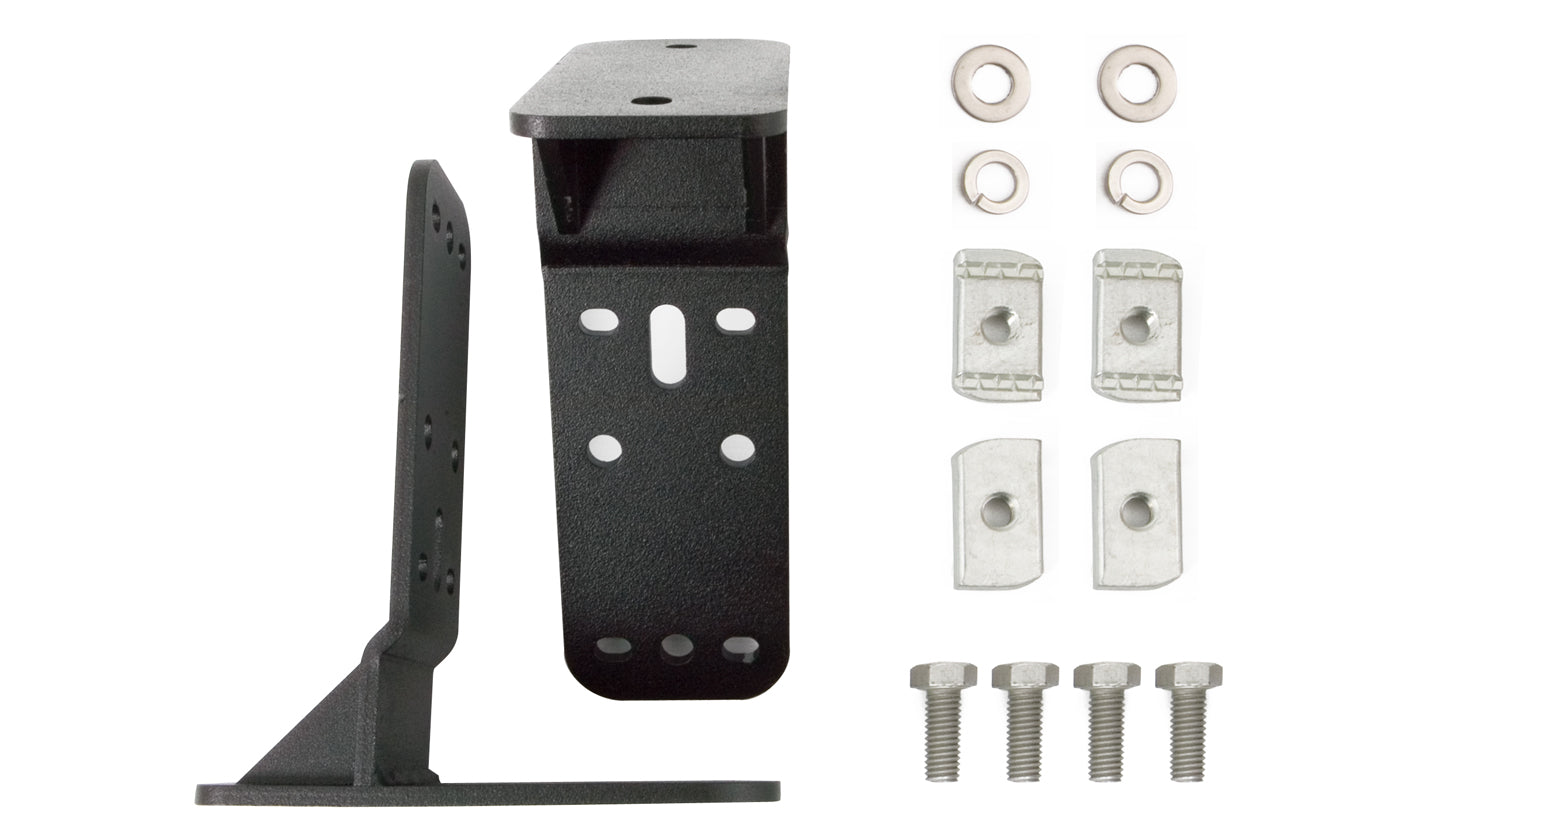 Brackets, nuts, washers, and bolts included in Rhino Rack Batwing Awning Bracket Kit for Tracklander Roof Tray